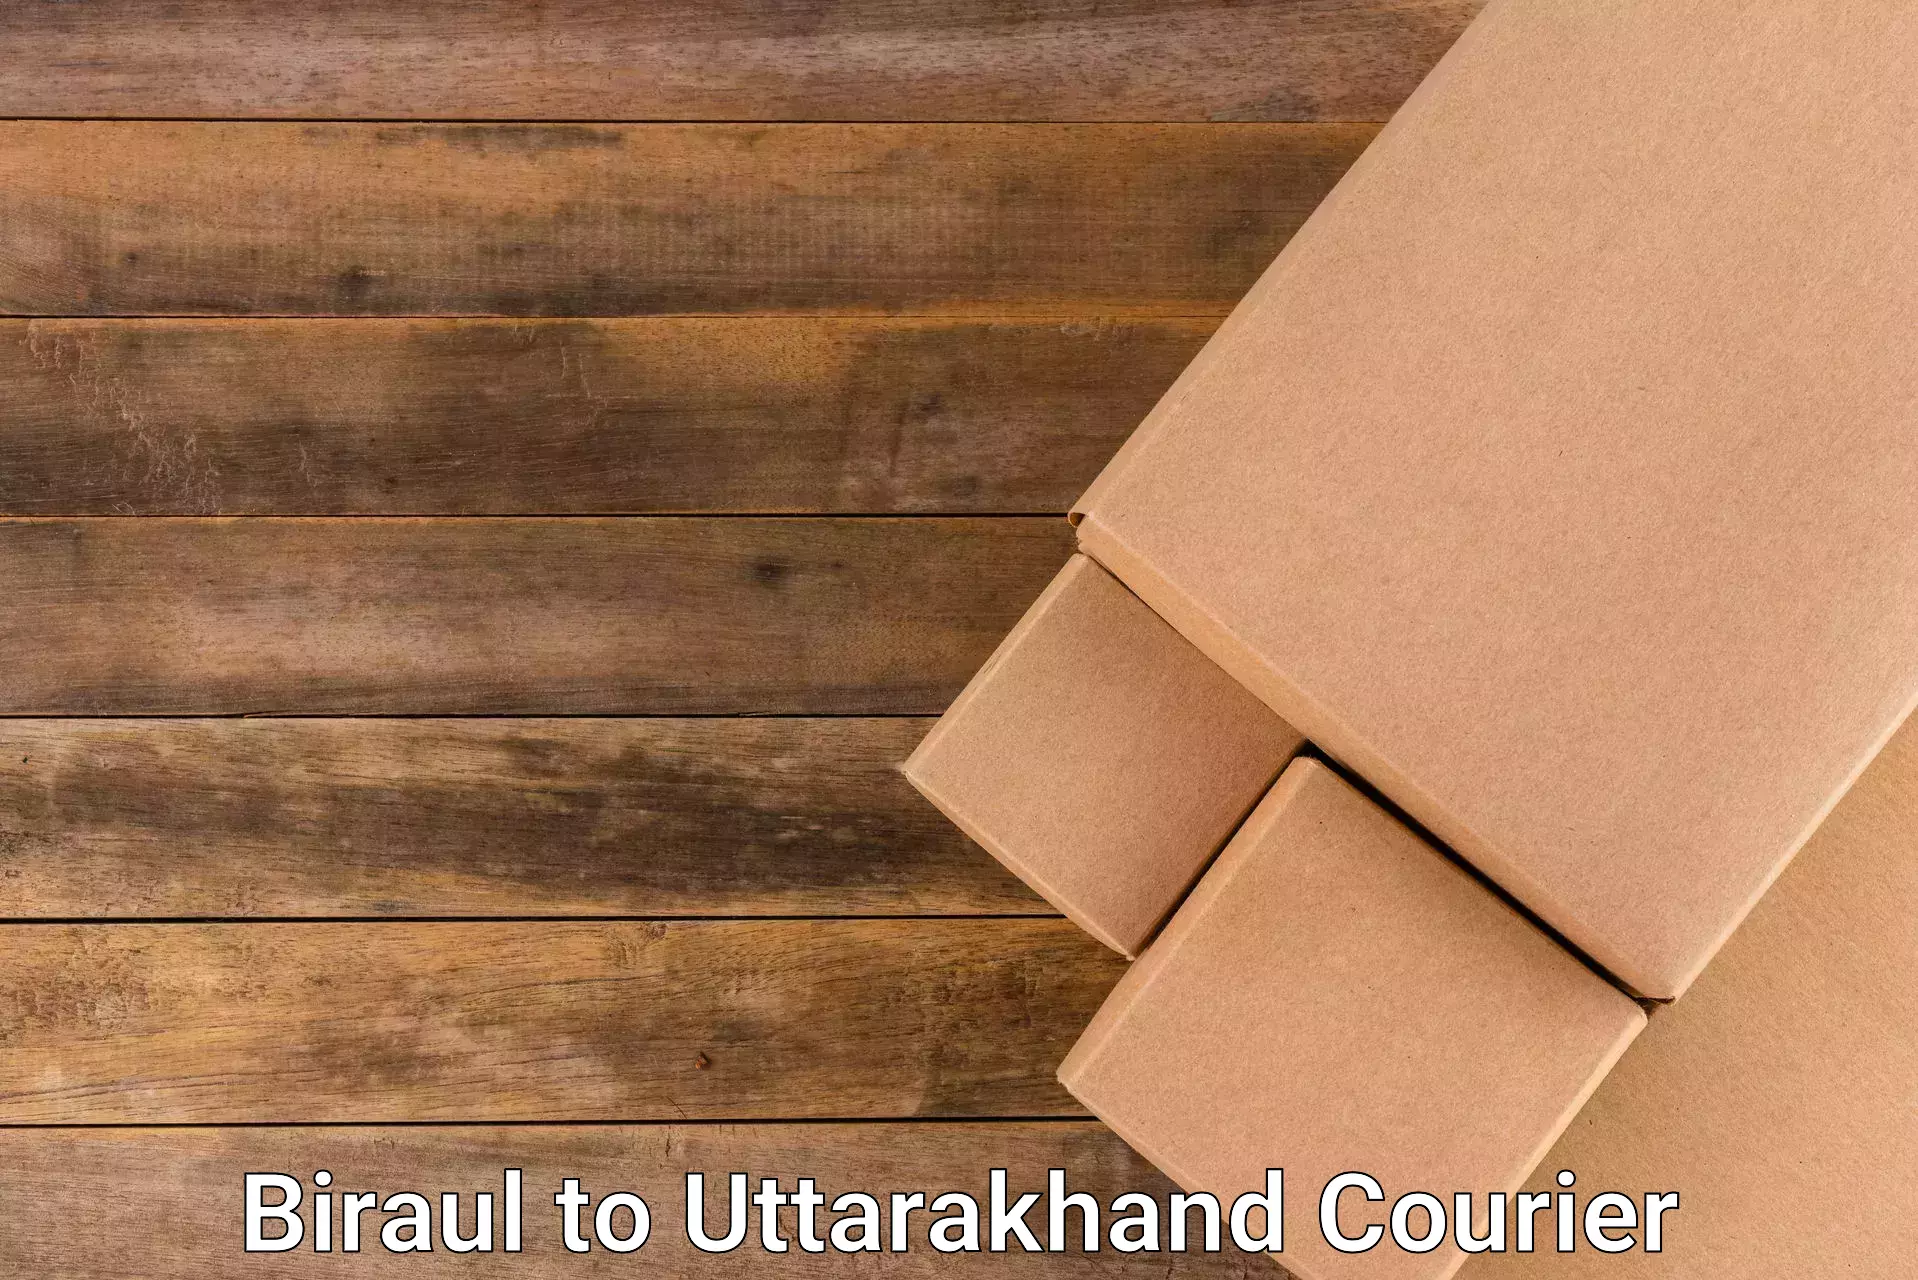 Parcel handling and care Biraul to Tehri